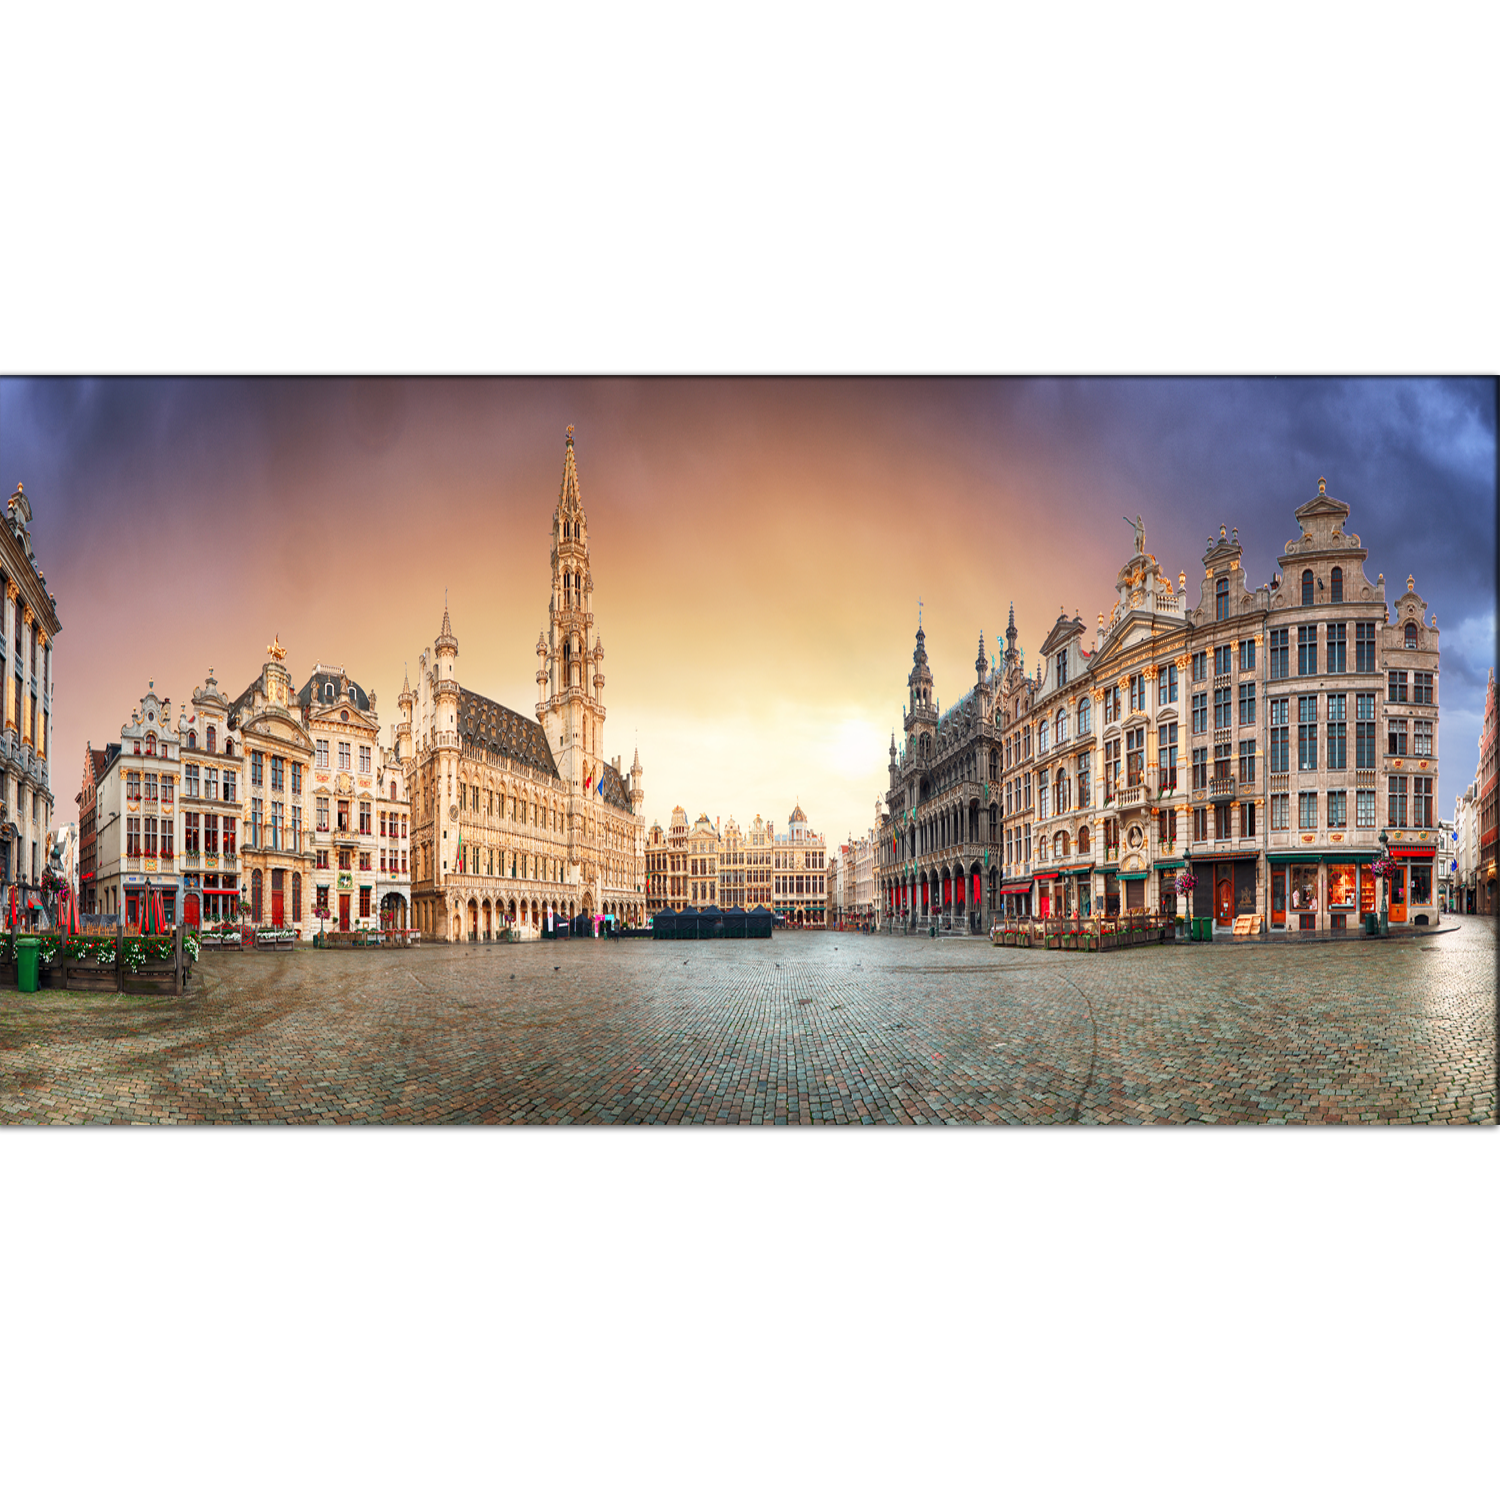 City View Canvas Print Wall Painting